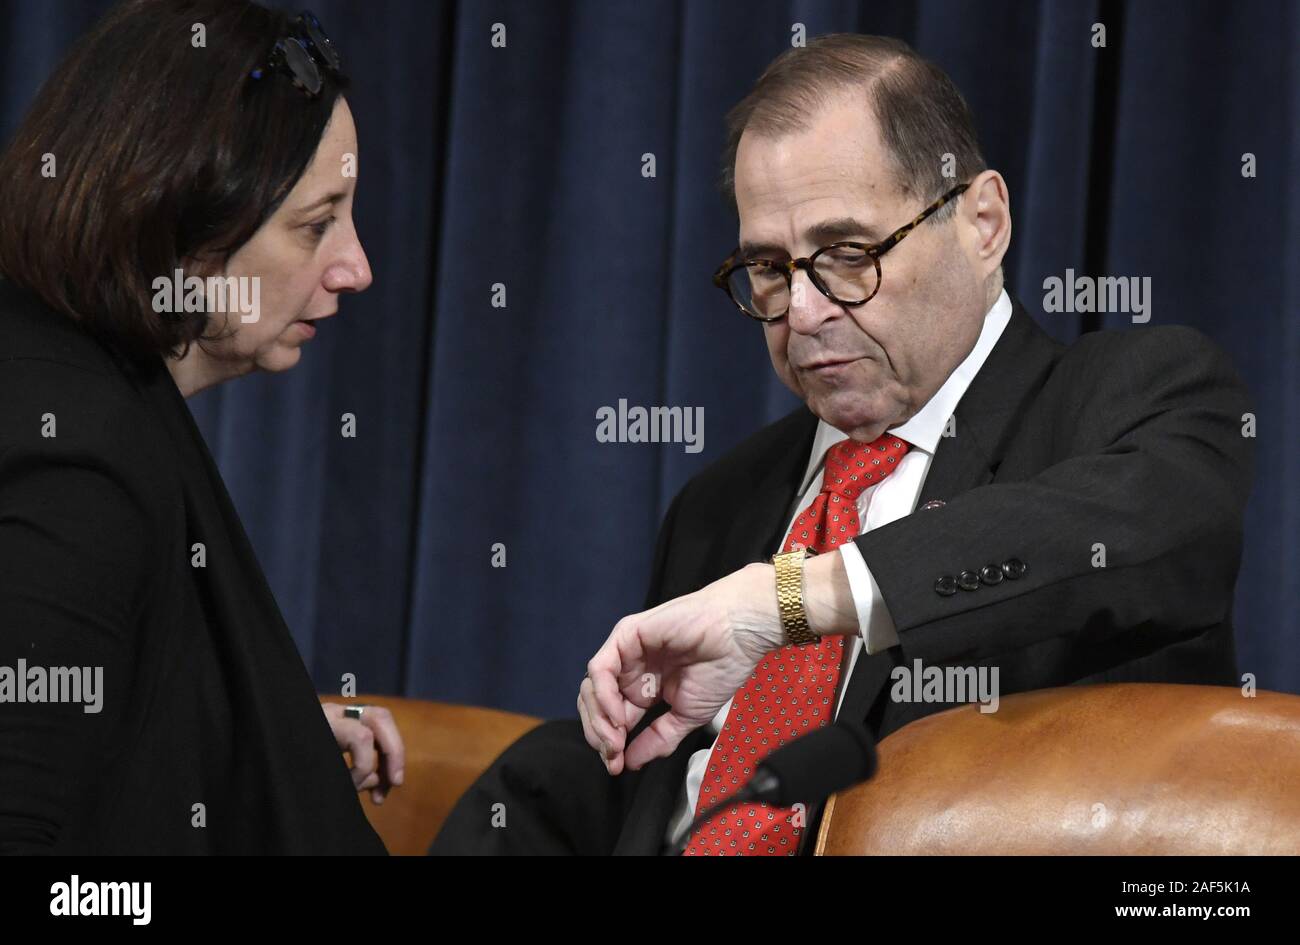 Washington, United States. 12th Dec, 2019. Chairman Jerrold Nadler of New York checks his watch during a recess of the House Judicary Committee as they debate amendments to two articles of impeachment against President Donald Trump continue late into the evening, on Capitol Hill, in Washington, DC, Thursday, December 12, 2019. The president is accused of obstruction of Congress and abuse of power. Photo by Mike Theiler/UPI Credit: UPI/Alamy Live News Stock Photo